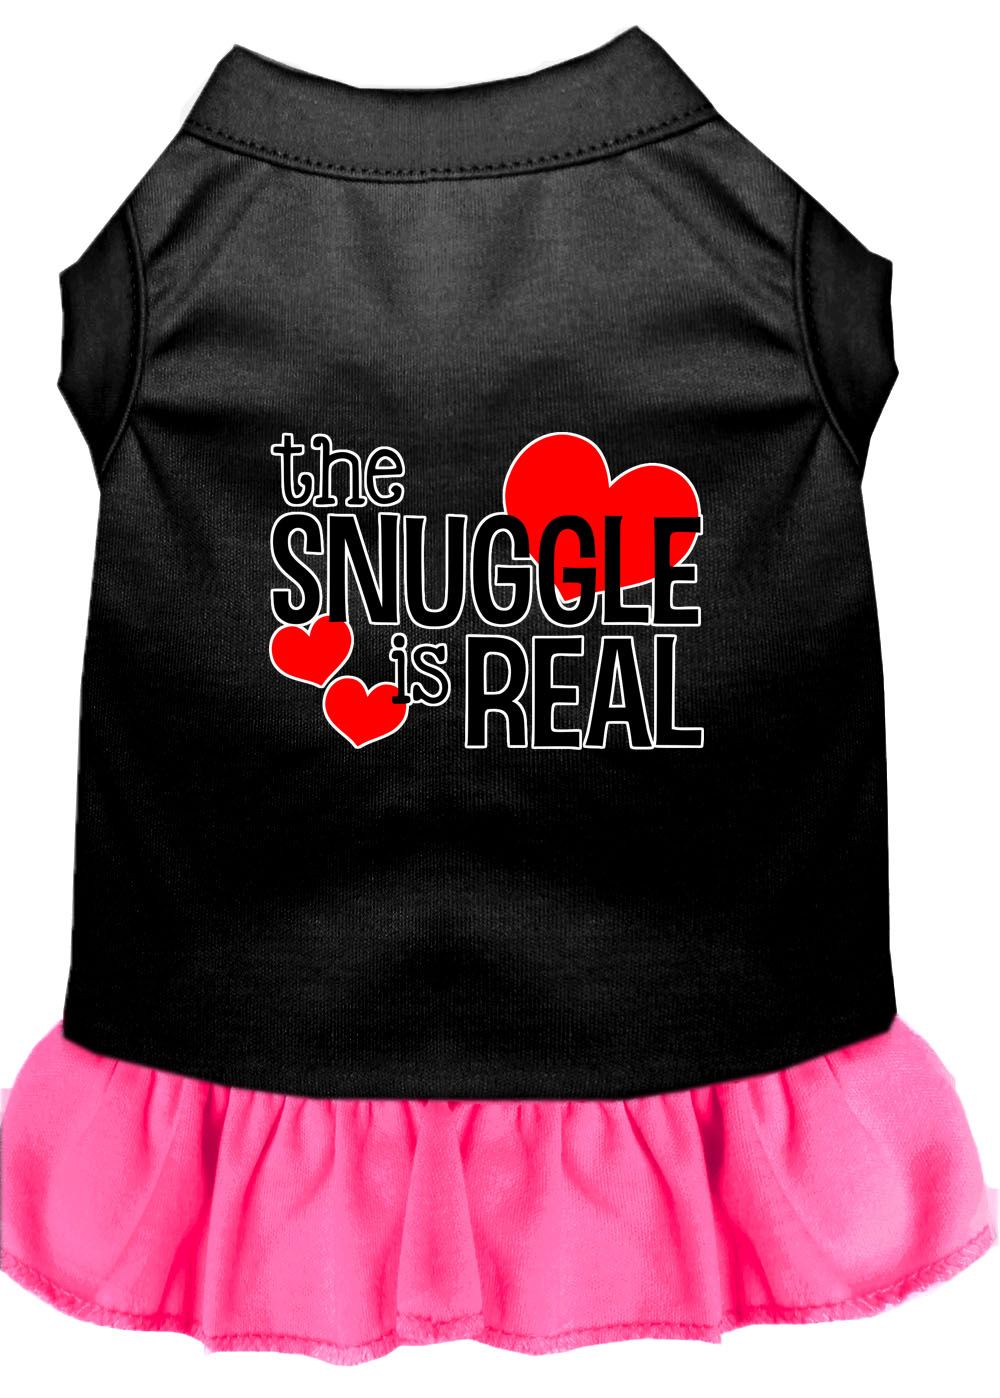 The Snuggle is Real Screen Print Dog Dress Black with Bright Pink XXXL